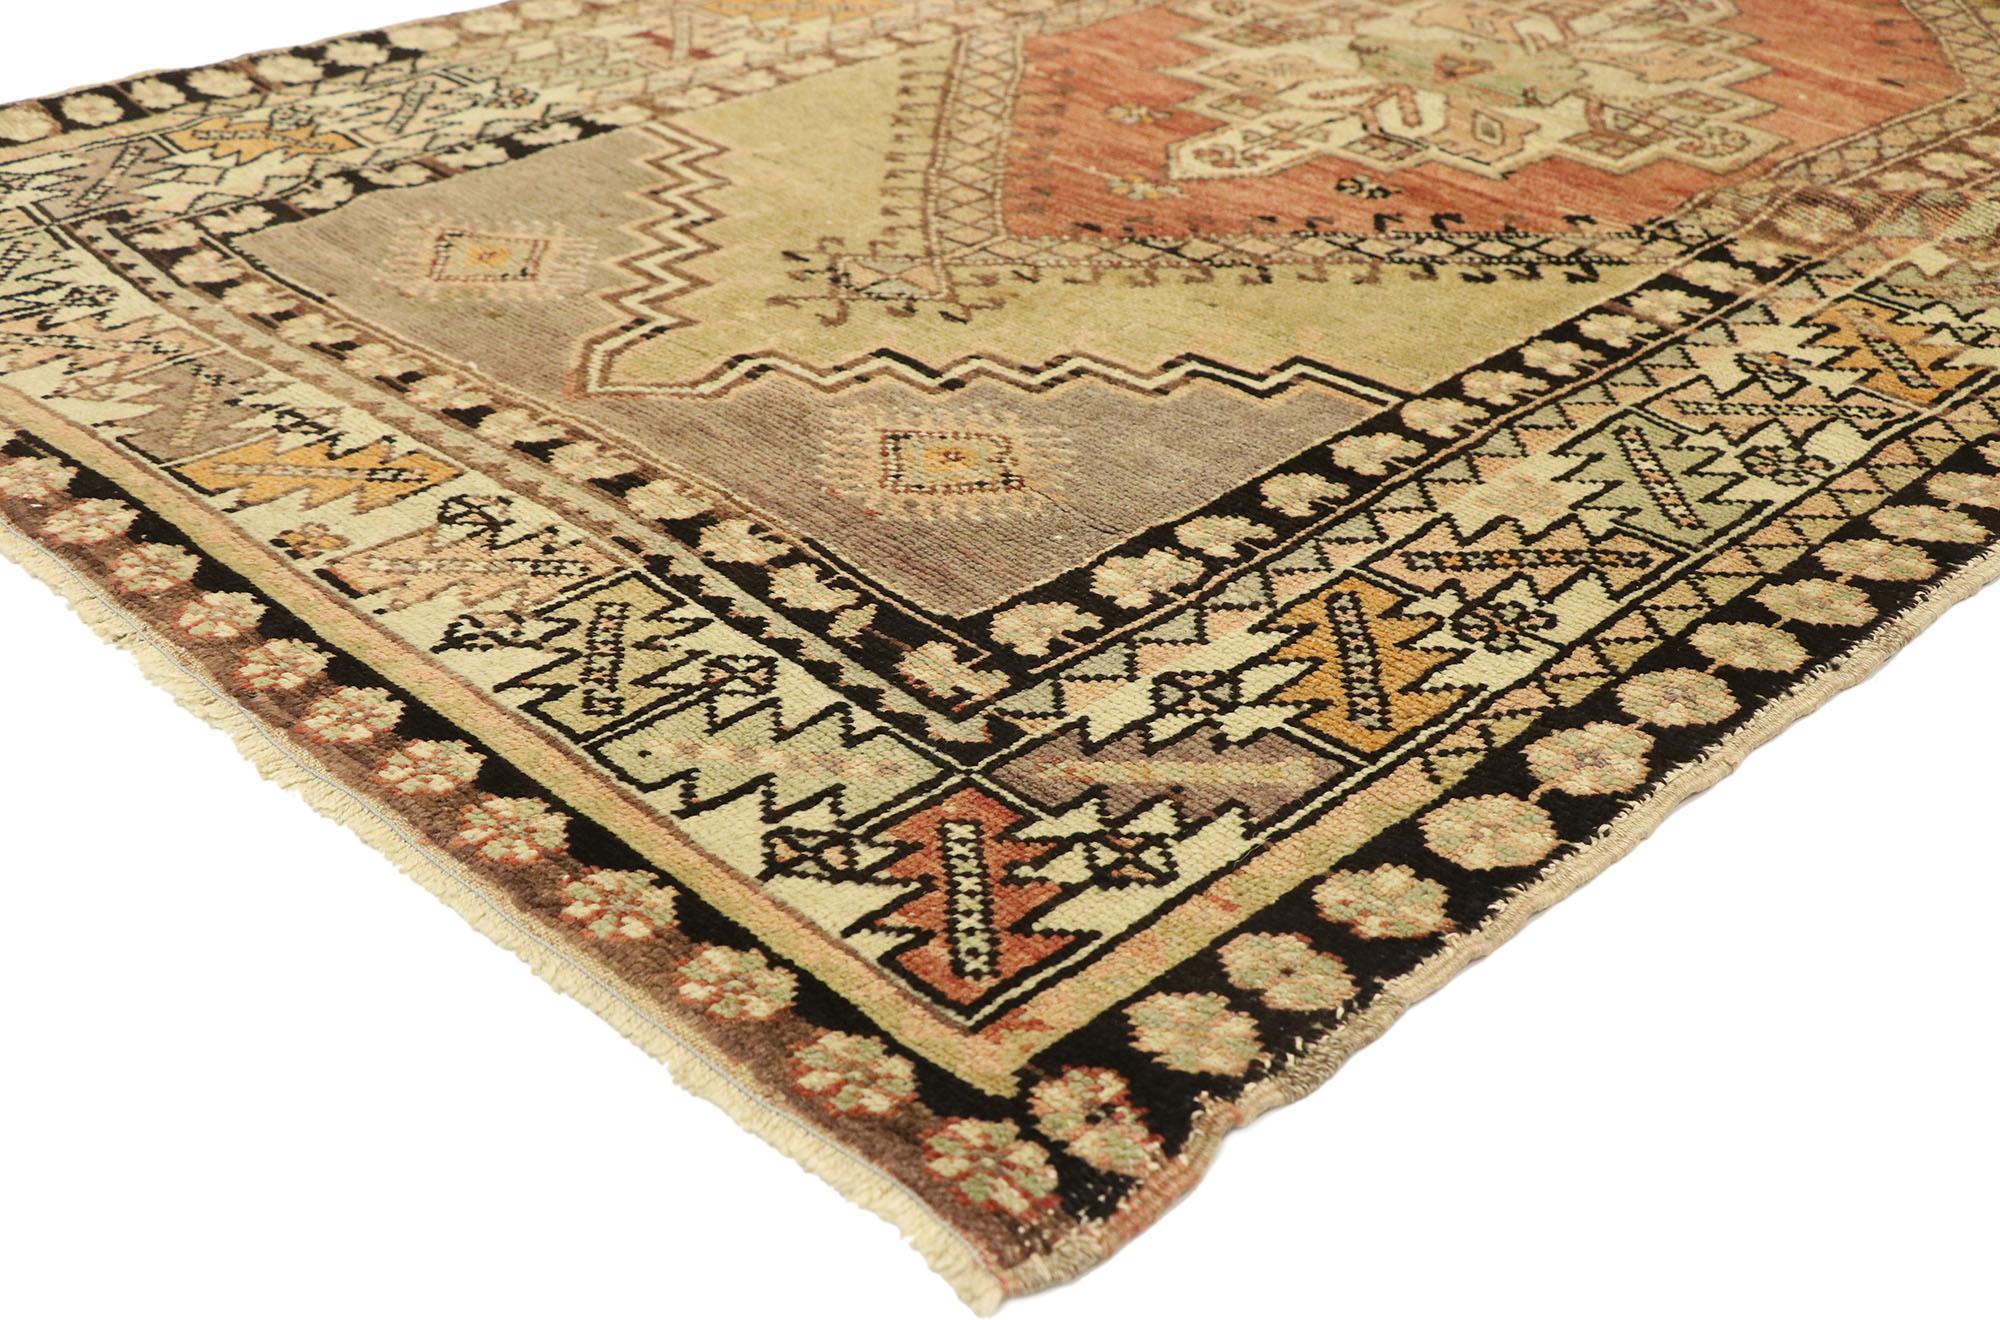 50161 vintage Turkish Oushak Accent rug with Rustic Tuscan style, Entry or Foyer rug. With its timeless design and warm earth-tone colors, this hand knotted wool vintage Turkish Oushak gallery rug astounds with its beauty. The abrashed cut-out field